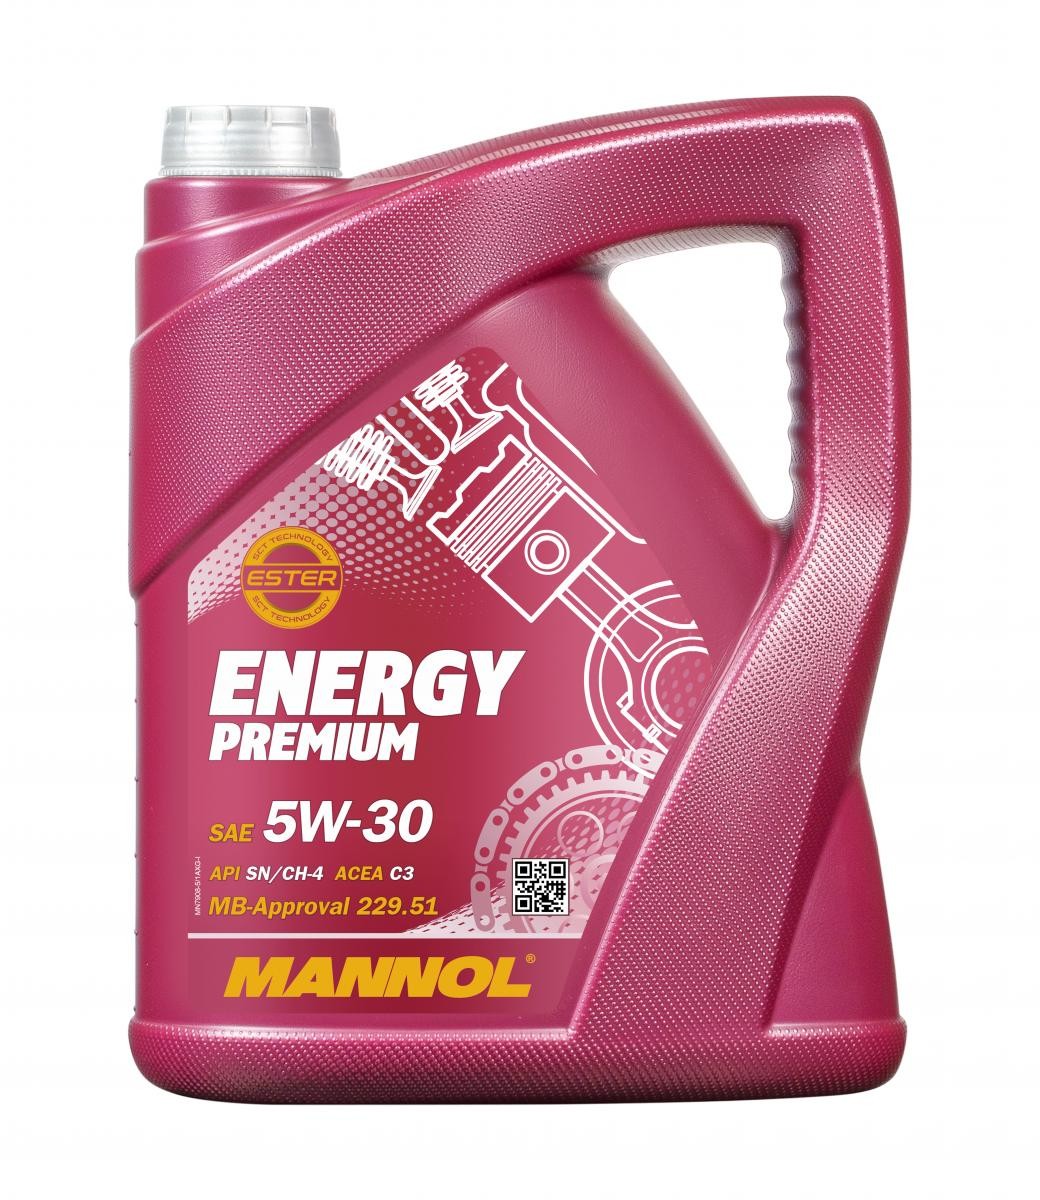 MANNOL ENERGY PREMIUM MN7908-5 Engine oil 5W-30, 5l, Synthetic Oil